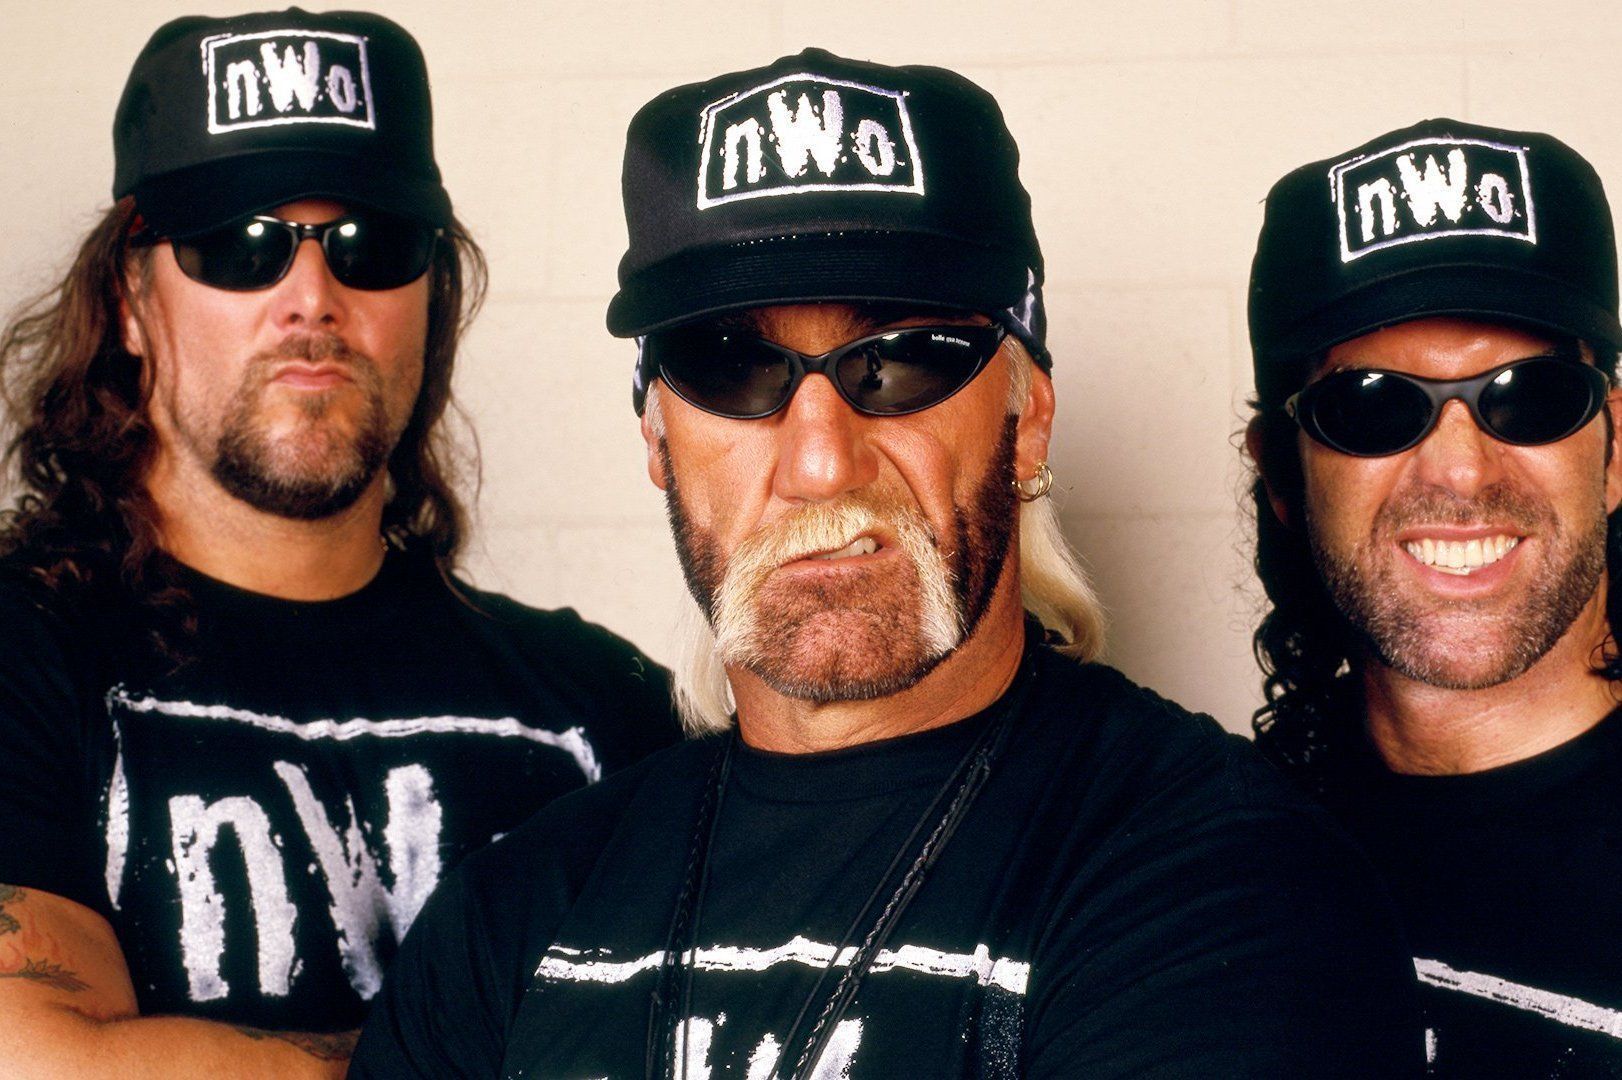 When you&#039;re nWo, you&#039;re nWo for LIFE!